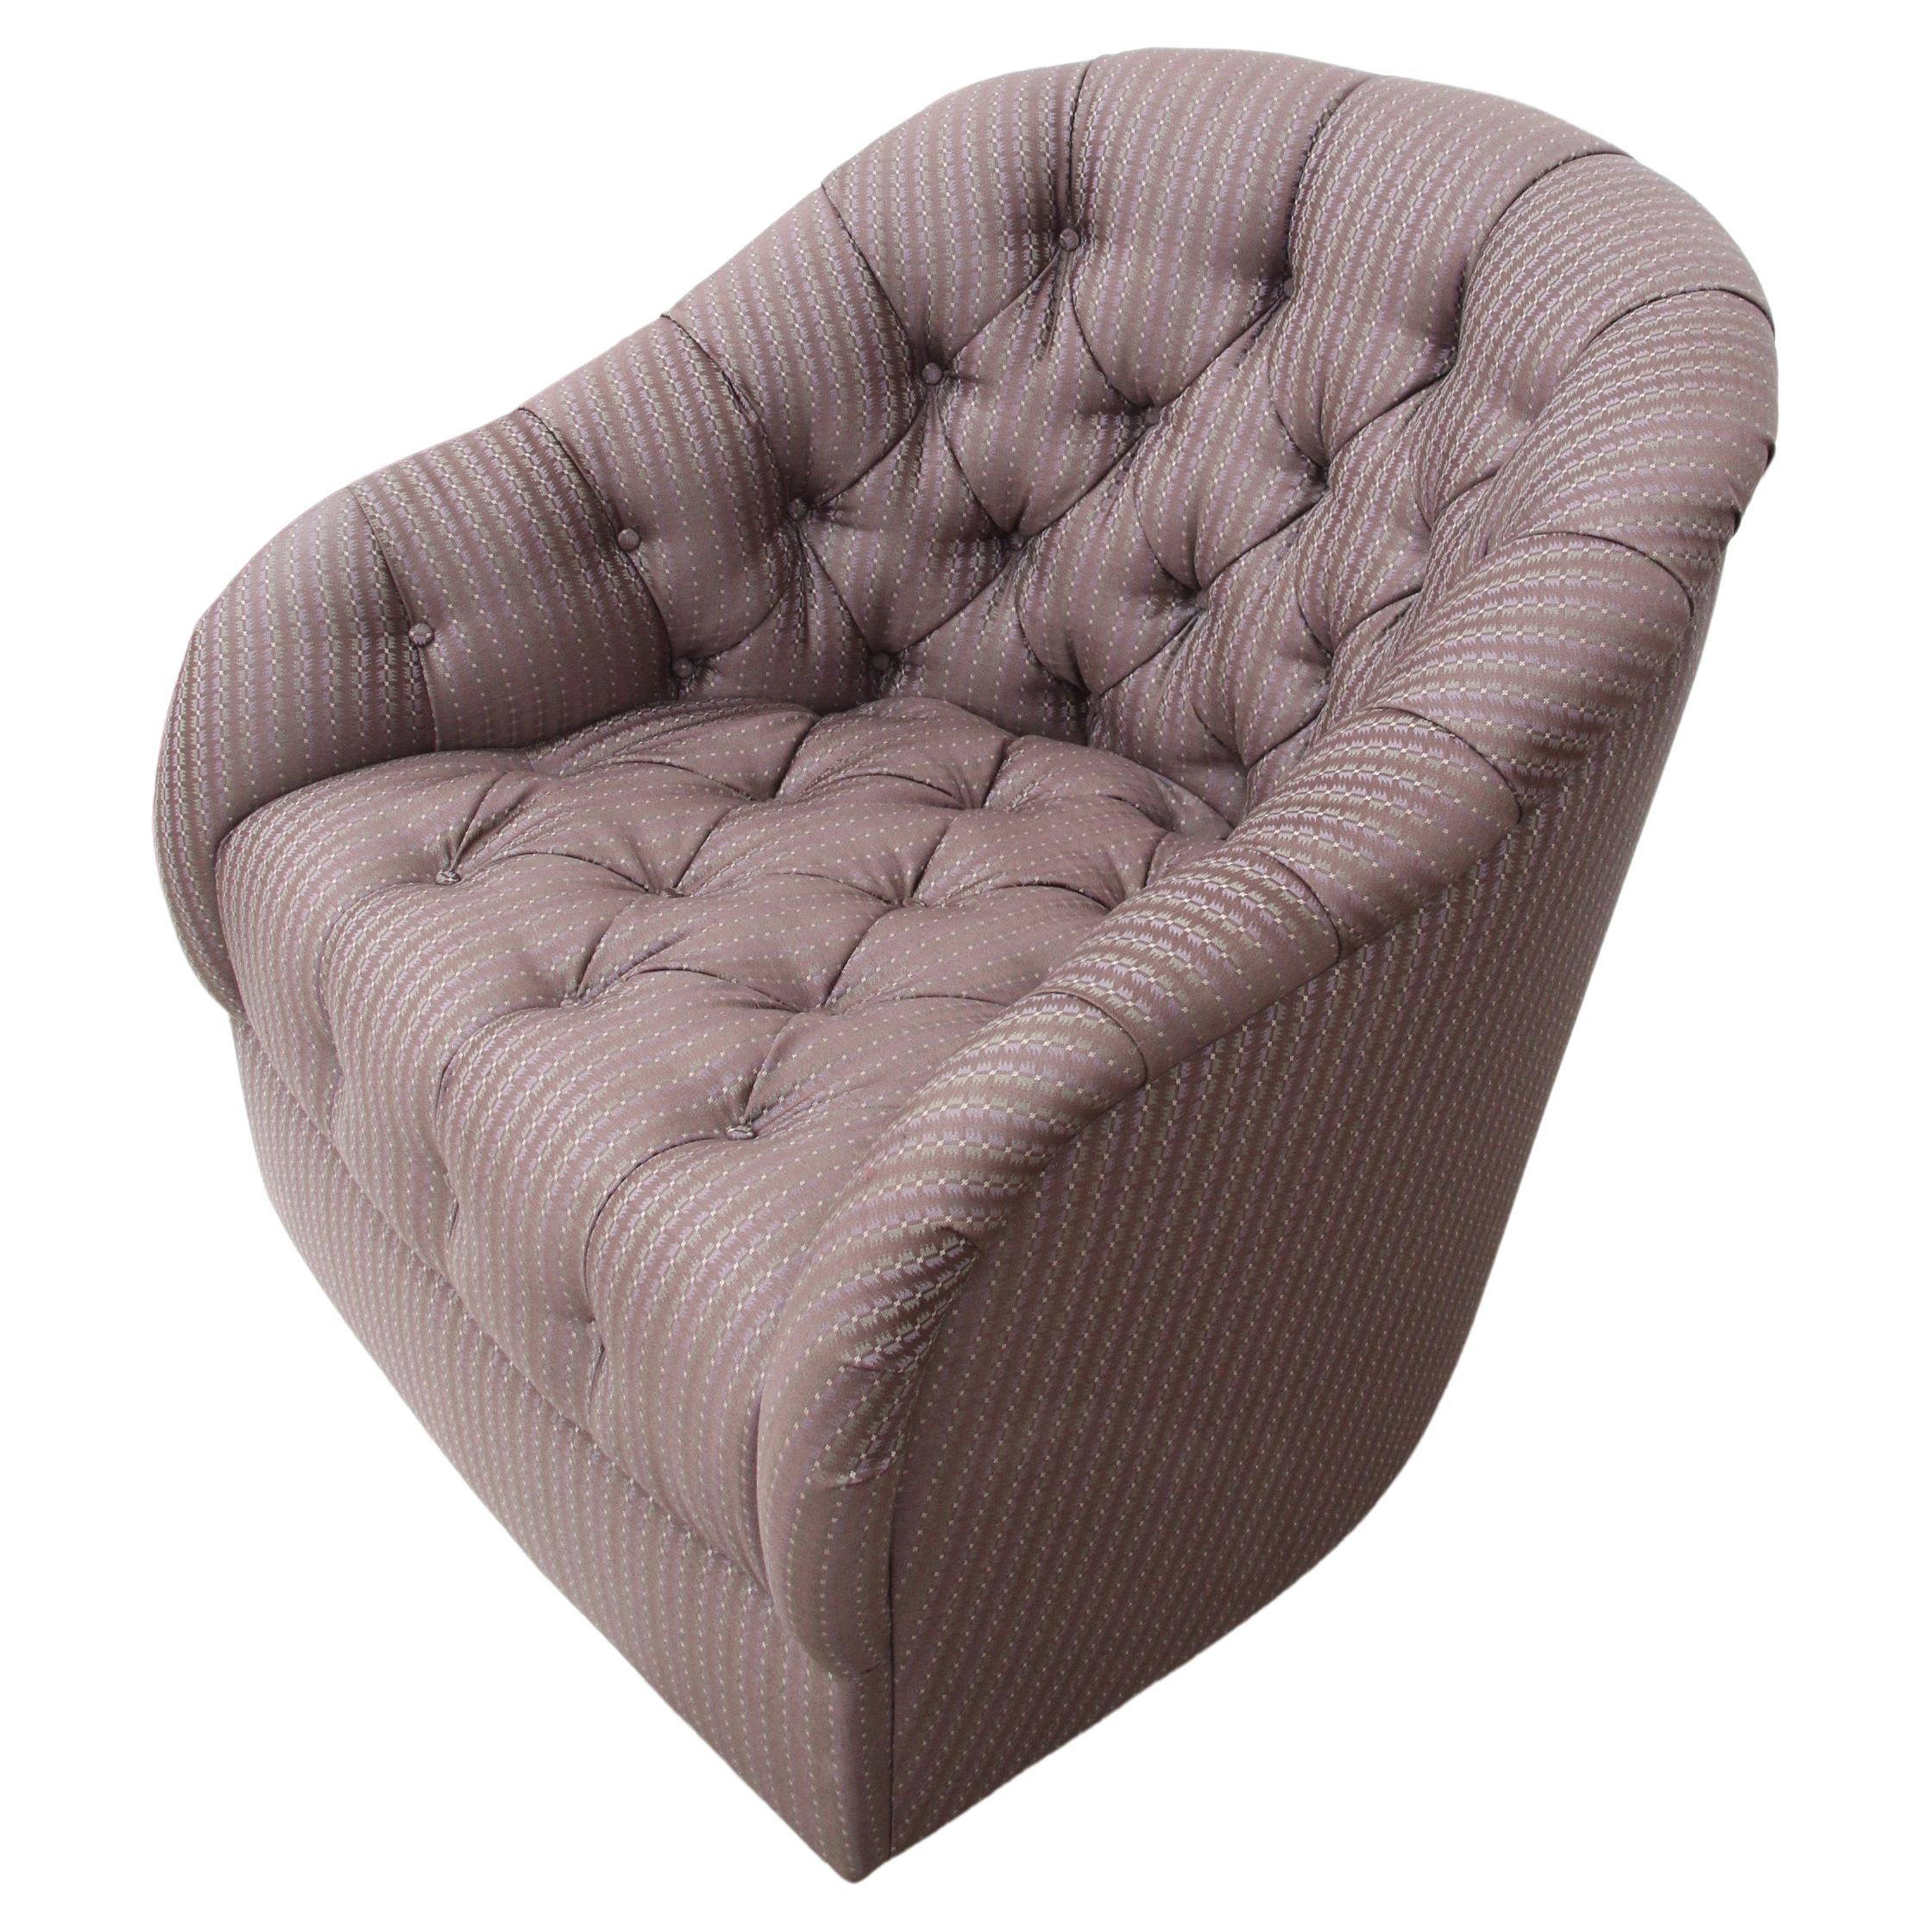 1 Ward Bennett Tufted Lounge Chair For Sale